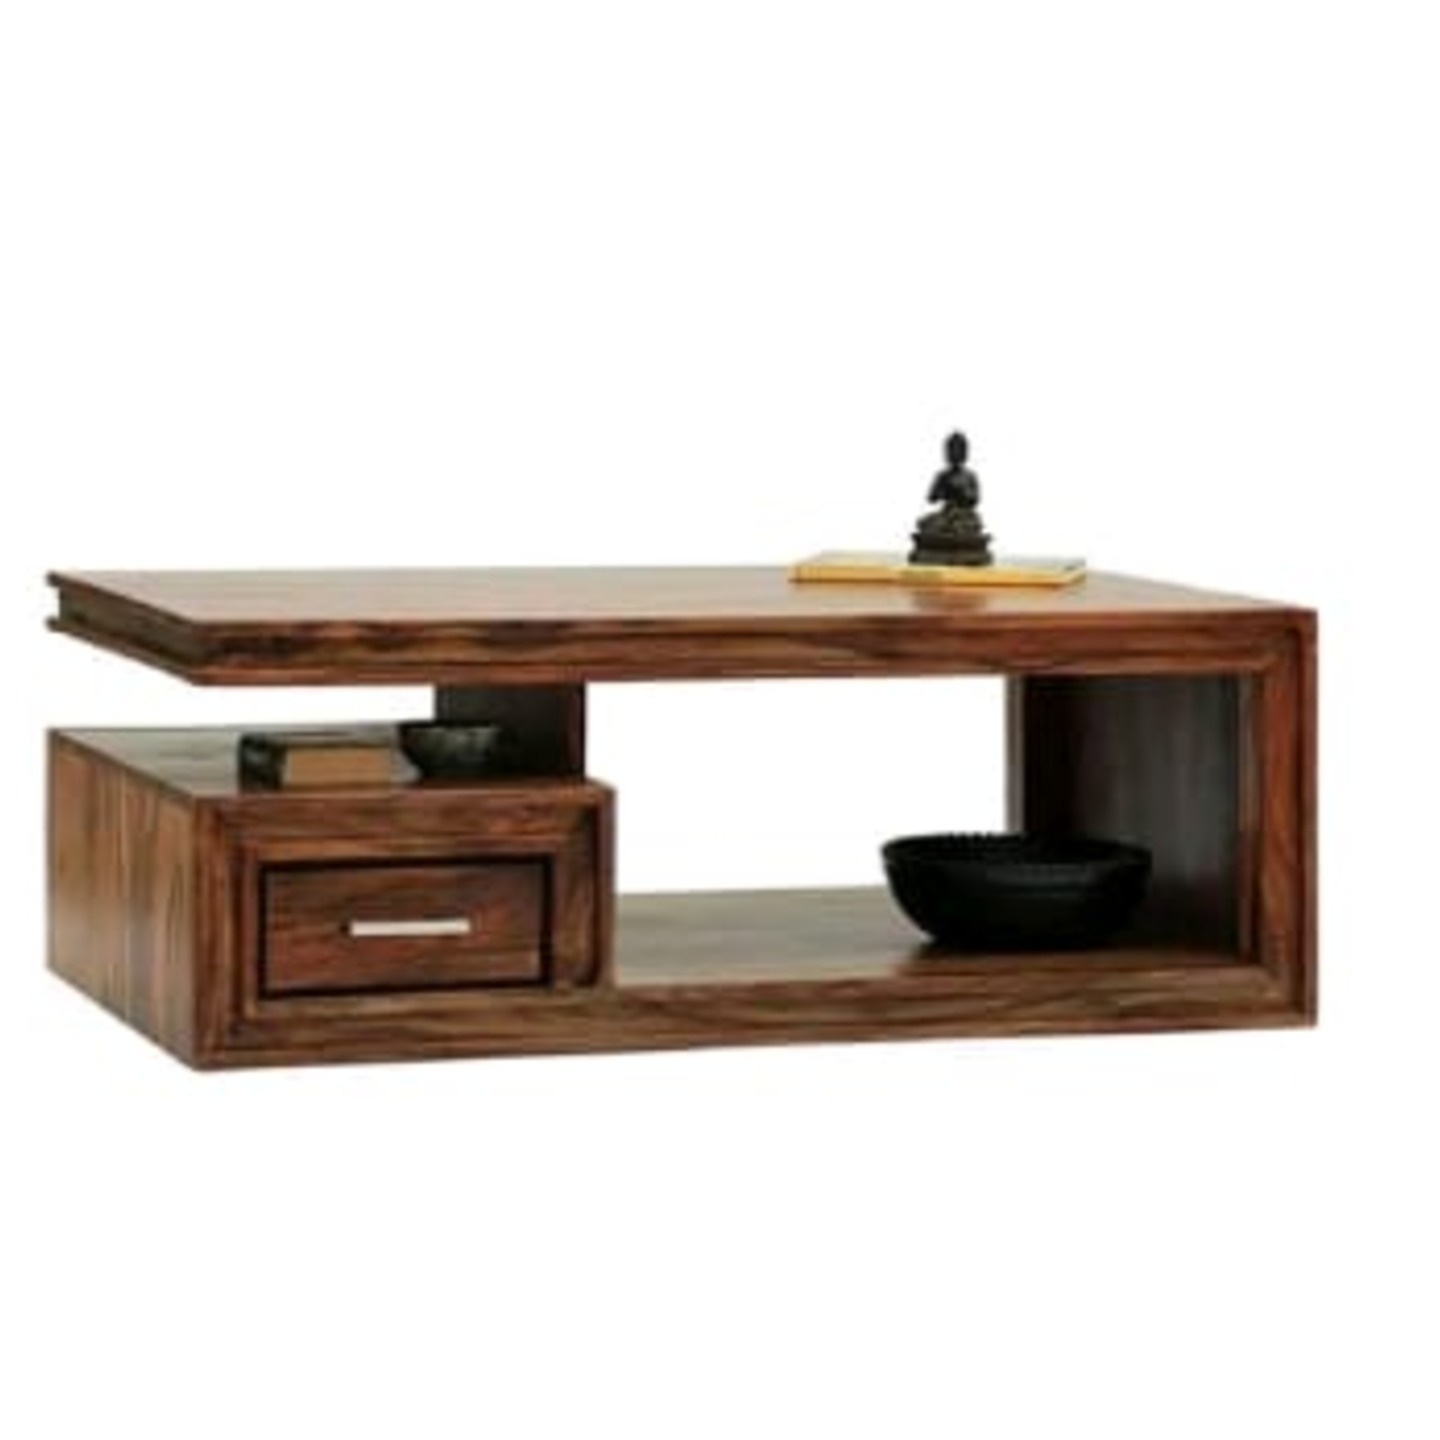 DW Center Table C-018 1 Drower In Brown Colour